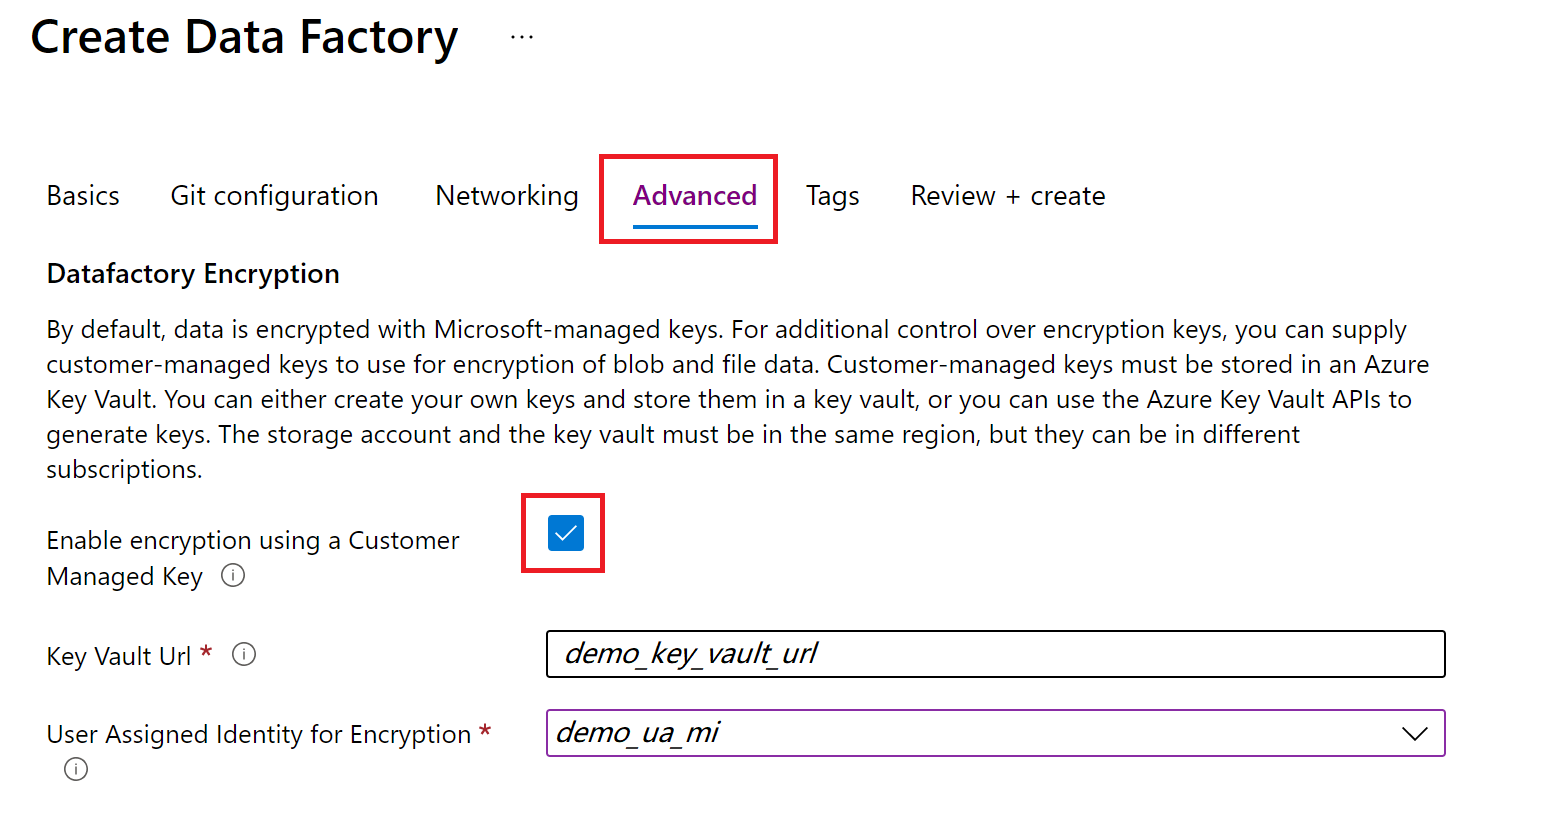 Screenshot of Advanced tab for data factory creation experience in Azure portal.